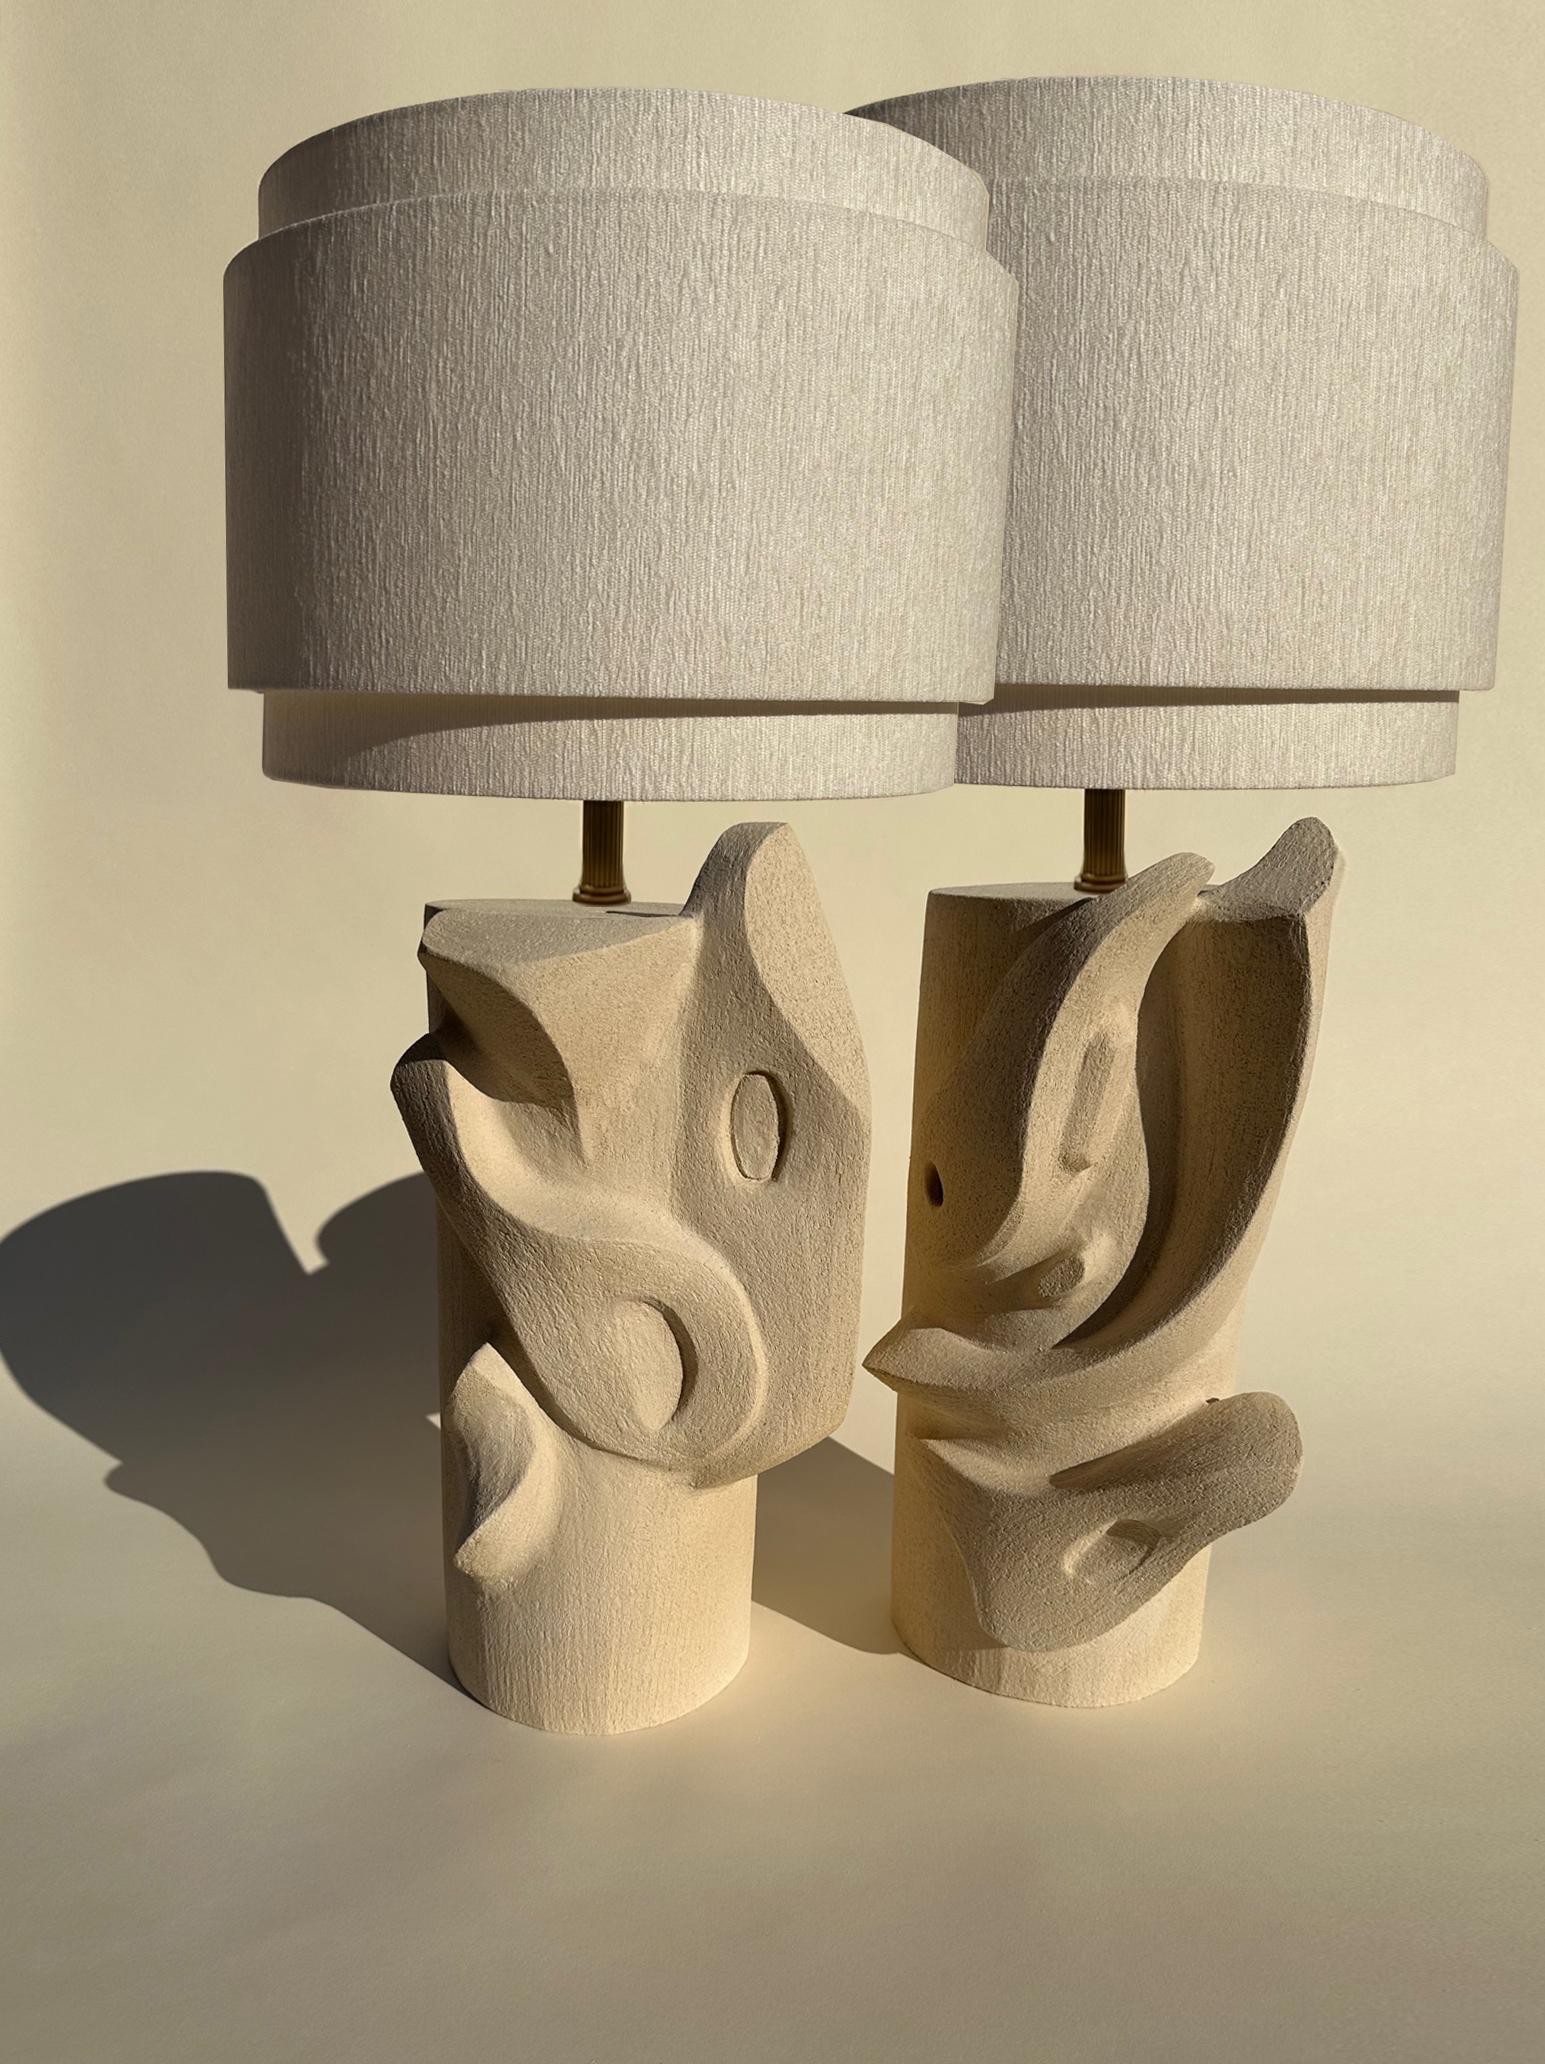 Bas Relief Table Lamp by Olivia Cognet
Dimensions: Base: D 20 x H 45 cm, Shade : 40 x 40 cm
Materials: Ceramic.

Since moving to Los Angeles in 2016, French artist and designer Olivia Cognet has focused on ceramics as the fertile medium through